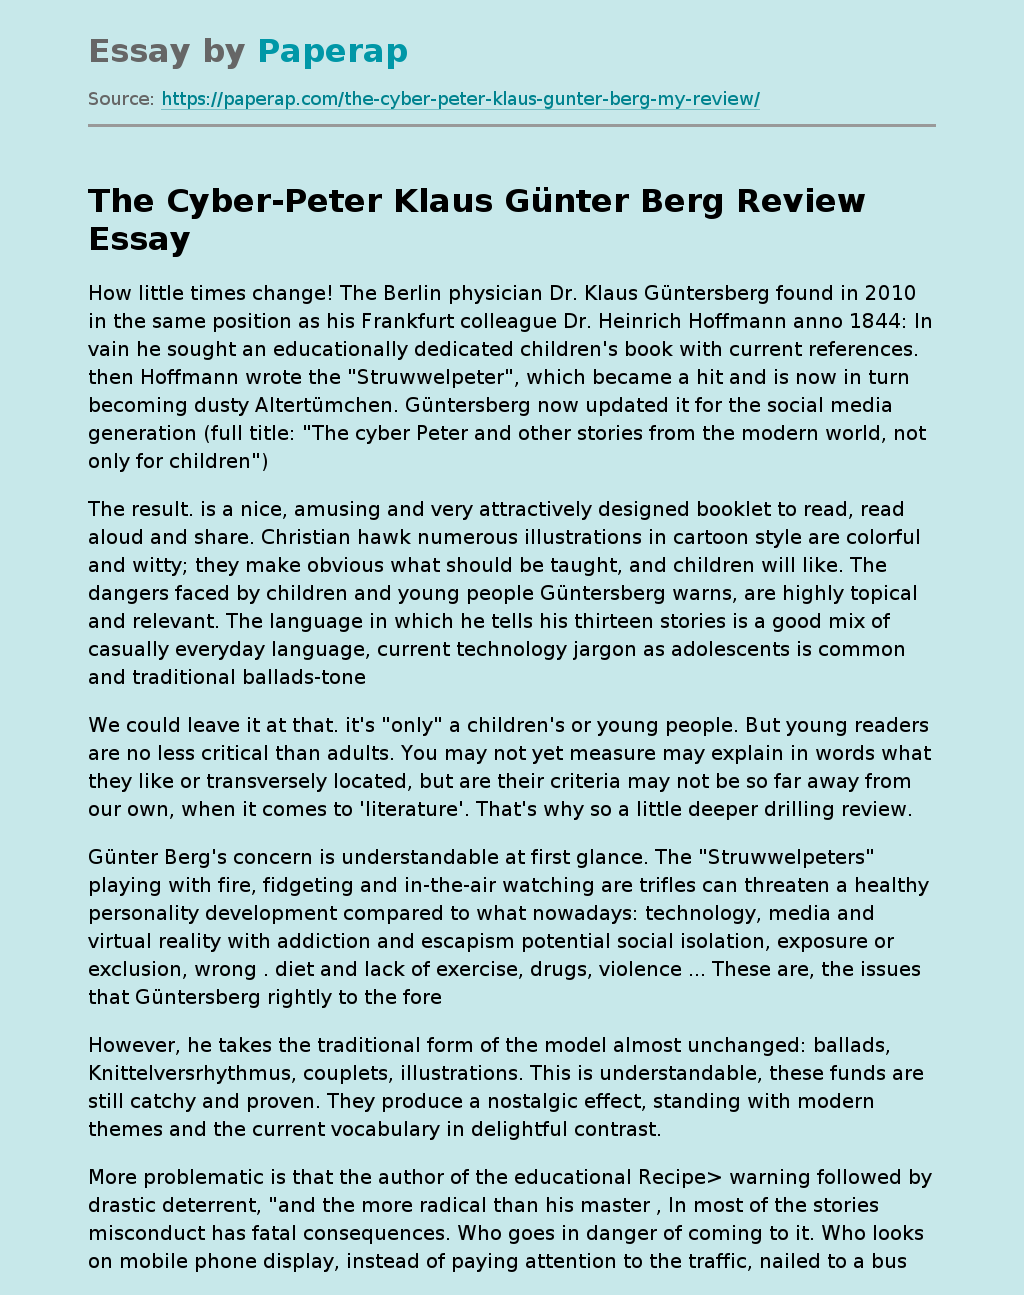 "The Cyber-Peter" by Klaus GünterBerg